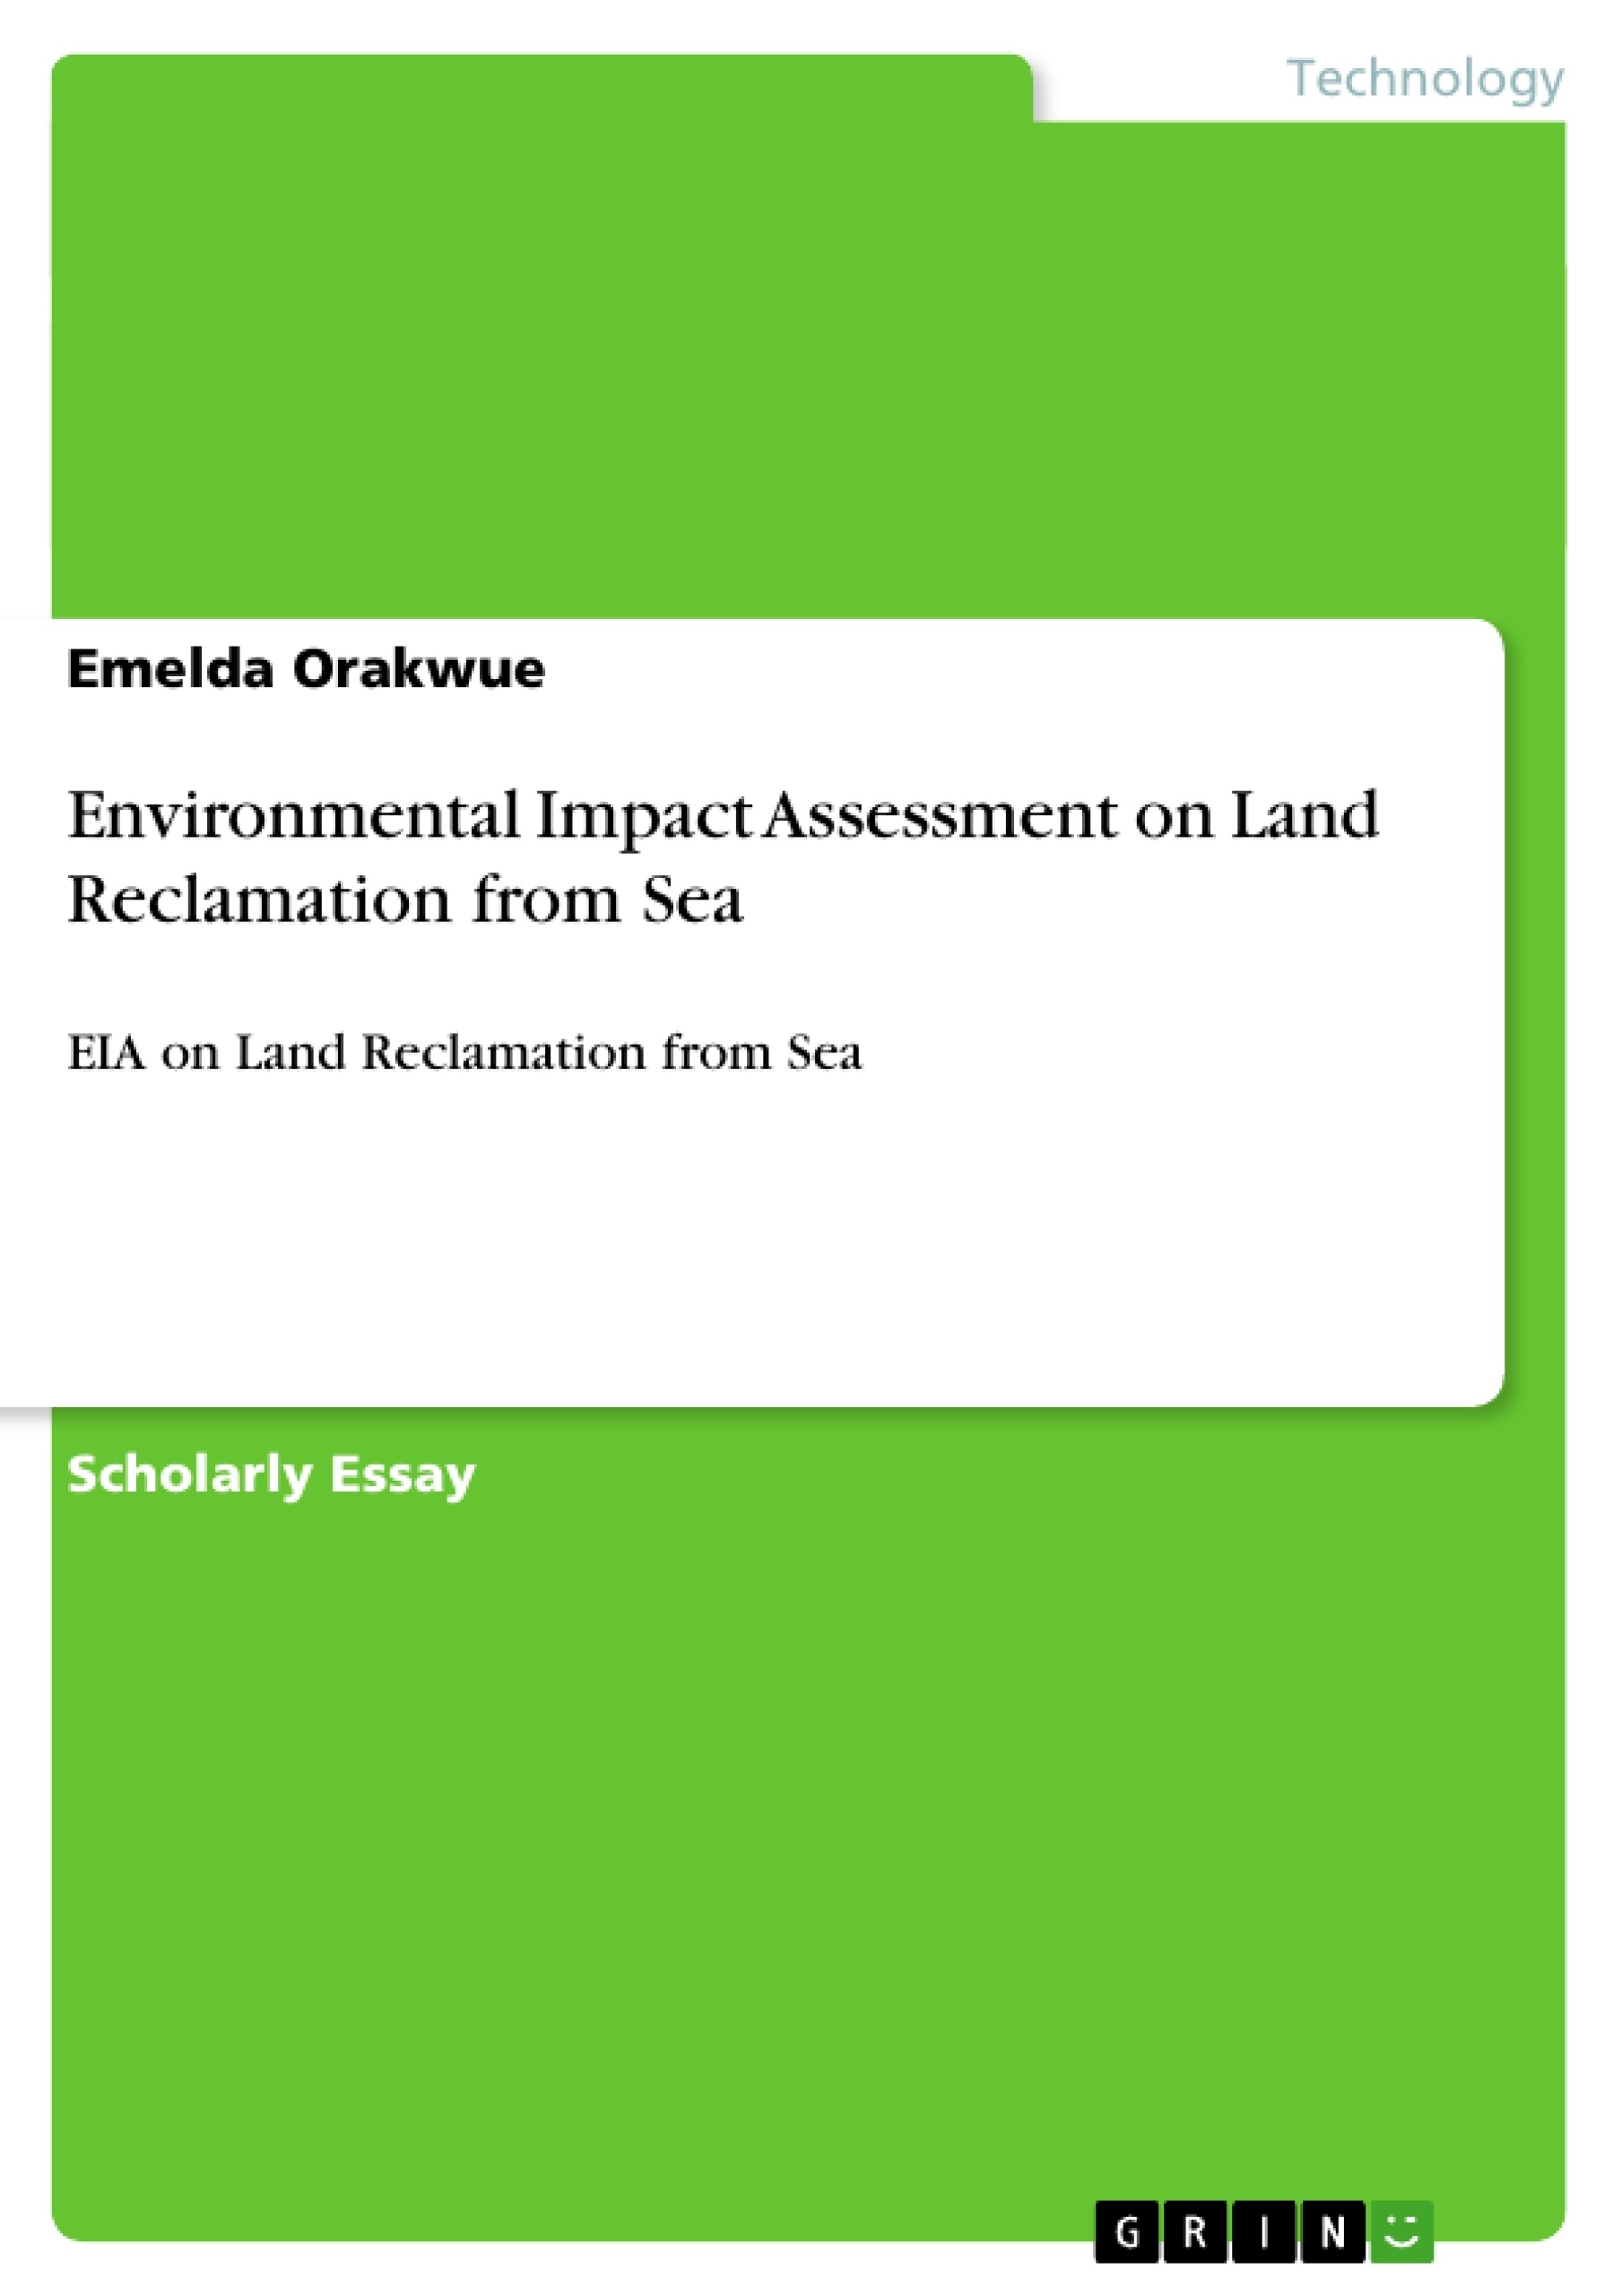 Title: Environmental Impact Assessment  on Land Reclamation from Sea